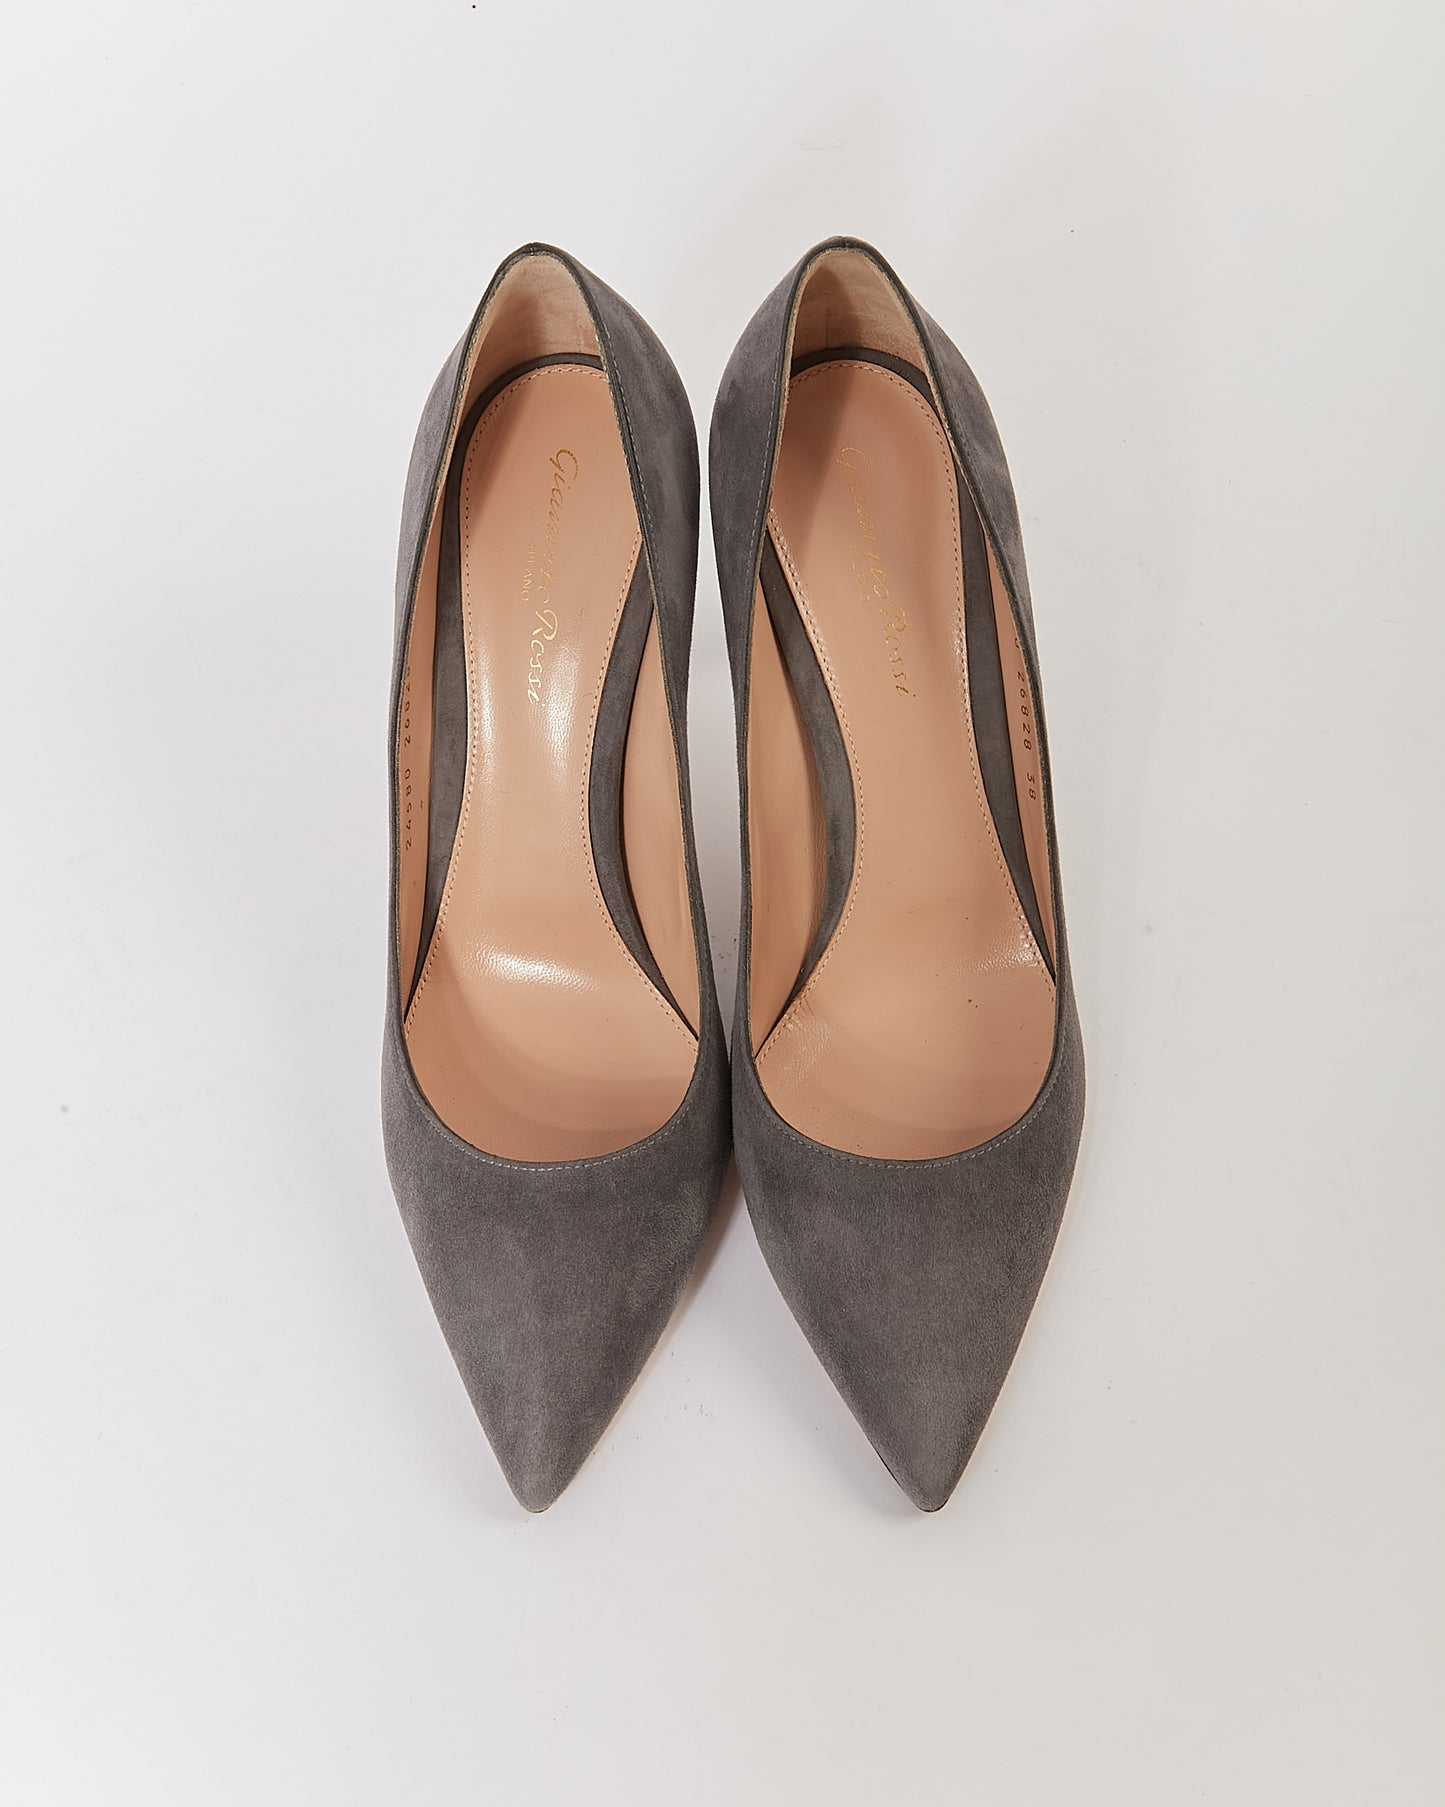 Gianvitto Rossi Grey Suede Point Toe Pumps - 38